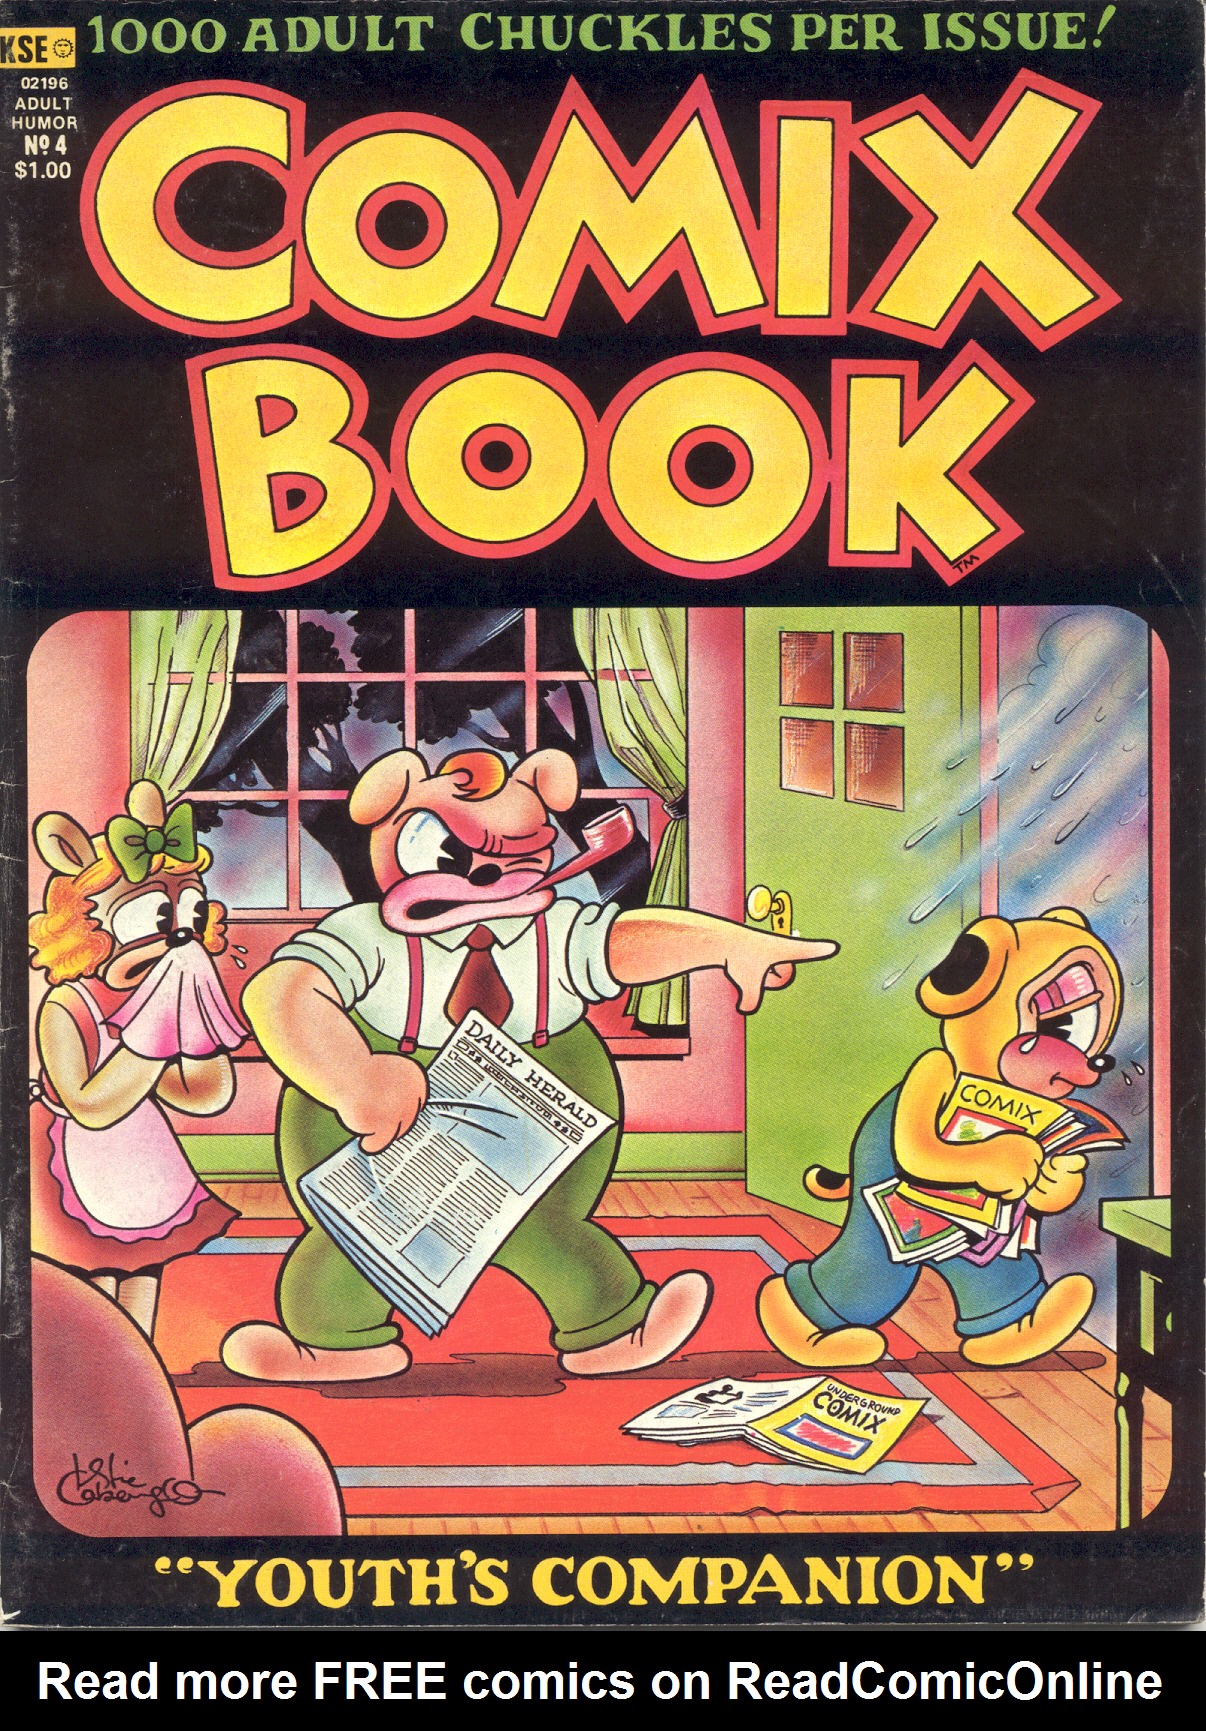 Read online Comix Book comic -  Issue #4 - 1